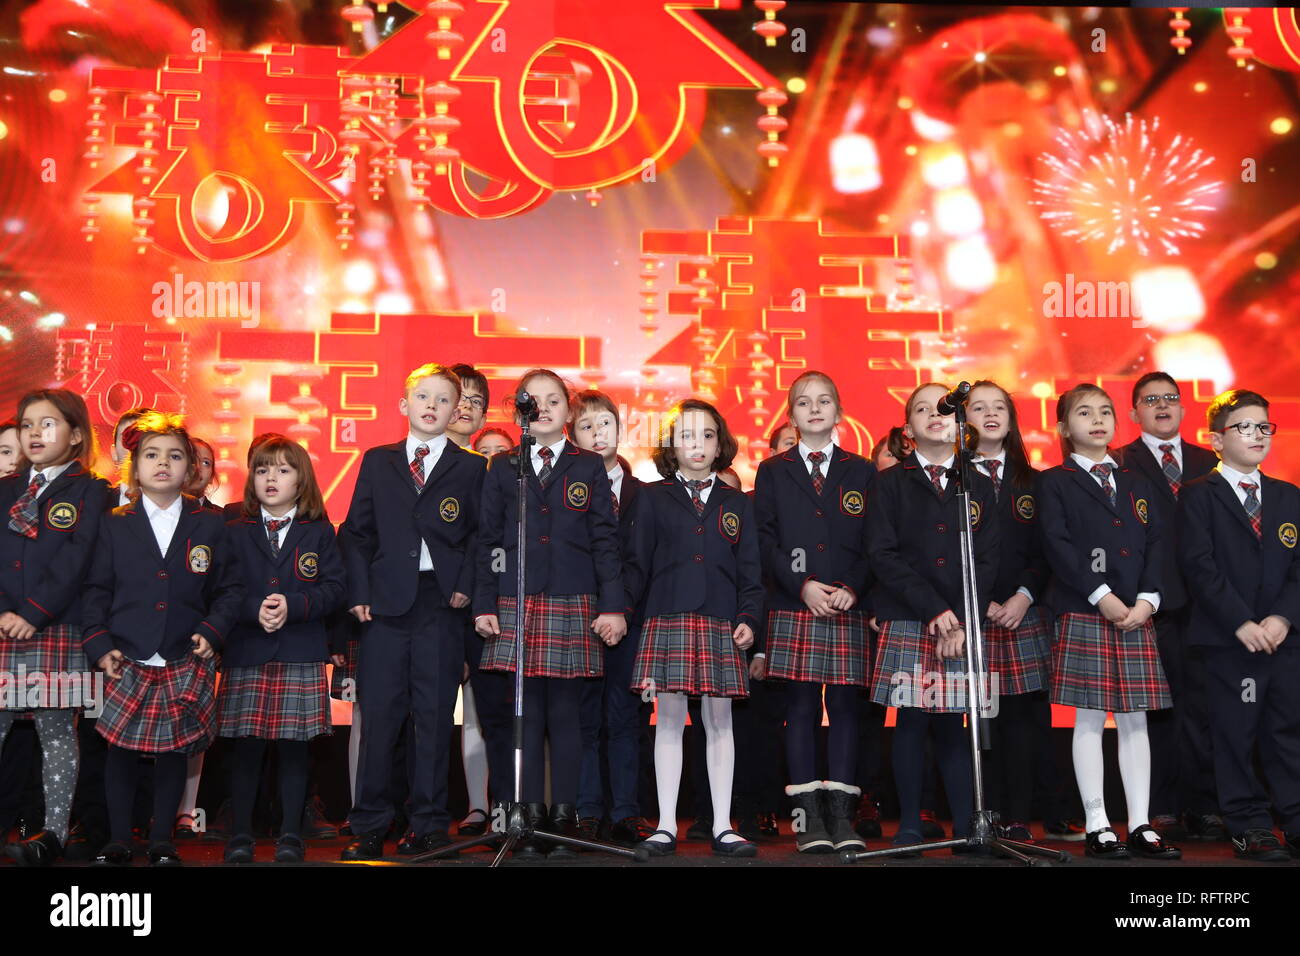 Sofia, Bulgaria. 26th Jan, 2019. Bulgarian children sing in a gala show titled 'Let's Share the Chinese New Year Together' in Sofia, Bulgaria, Jan. 26, 2019. Some 500 Bulgarians and Chinese attended the gala show to celebrate the upcoming Spring Festival. The event, jointly organized by the China Cultural Center, Confucius Institute in Sofia, and city government departments of Ningbo and Quanzhou, was also dedicated to the 70th anniversary of the establishment of diplomatic relations between the People's Republic of China and Bulgaria. Credit: Zhan Xiaoyi/Xinhua/Alamy Live News Stock Photo